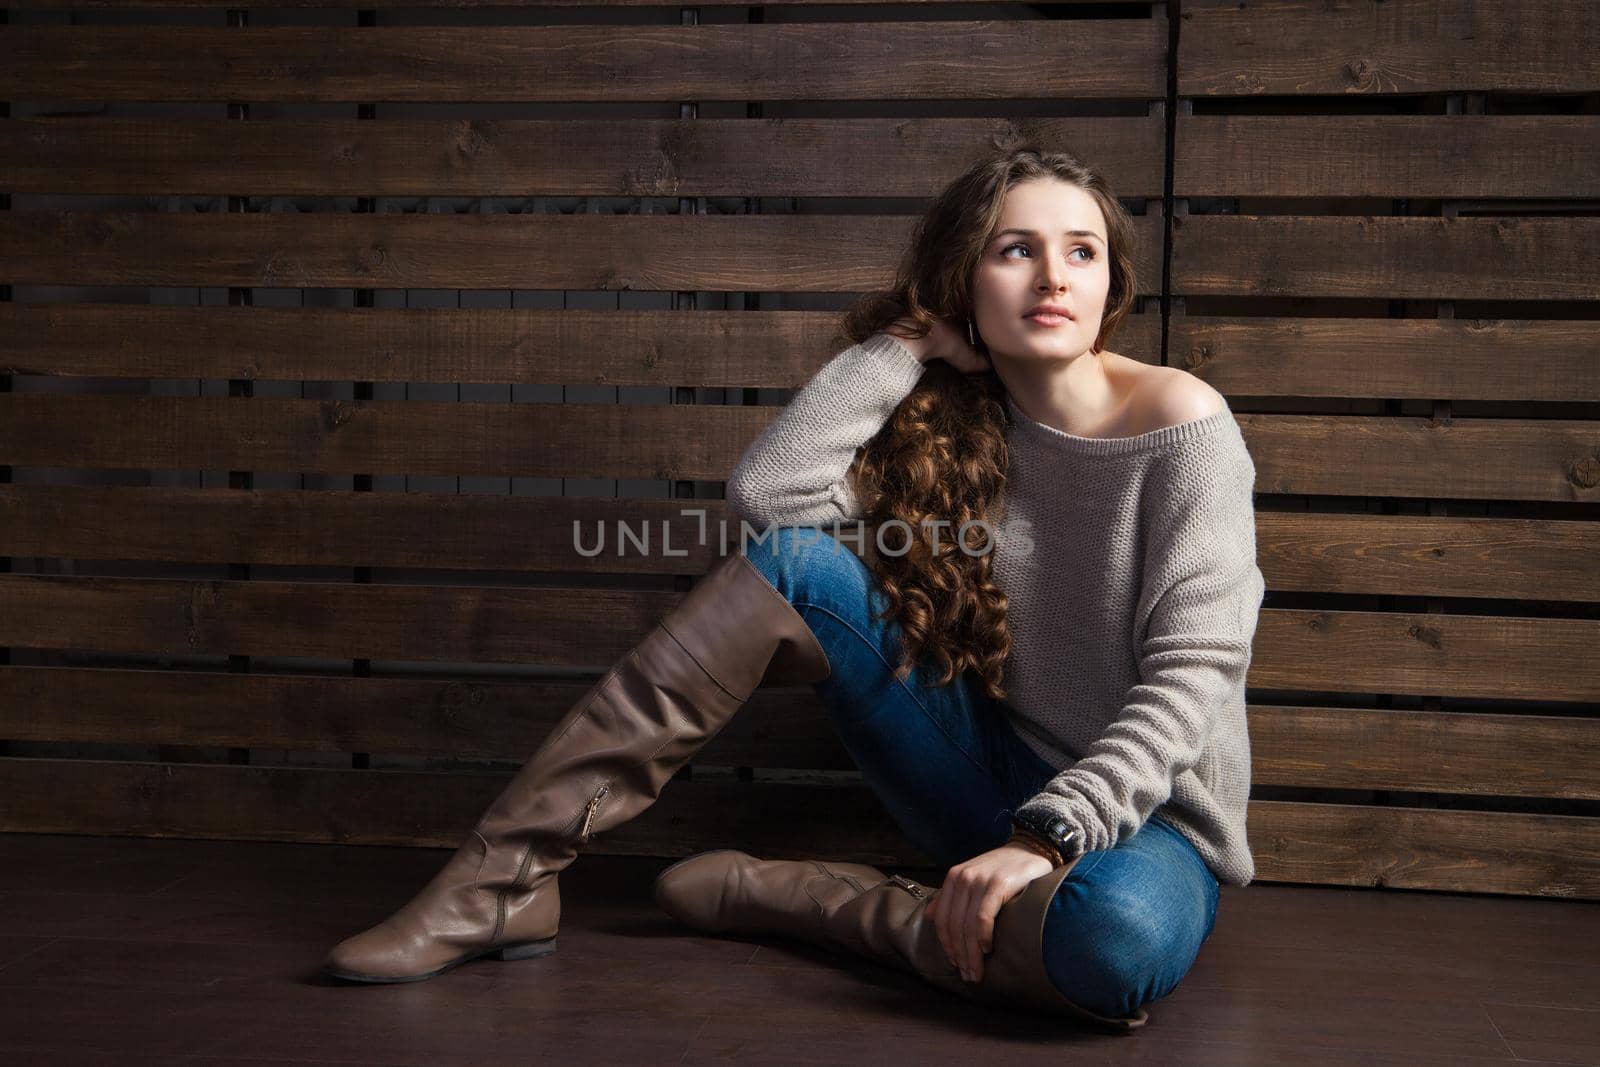 young woman in cowboy style clothes on wooden background